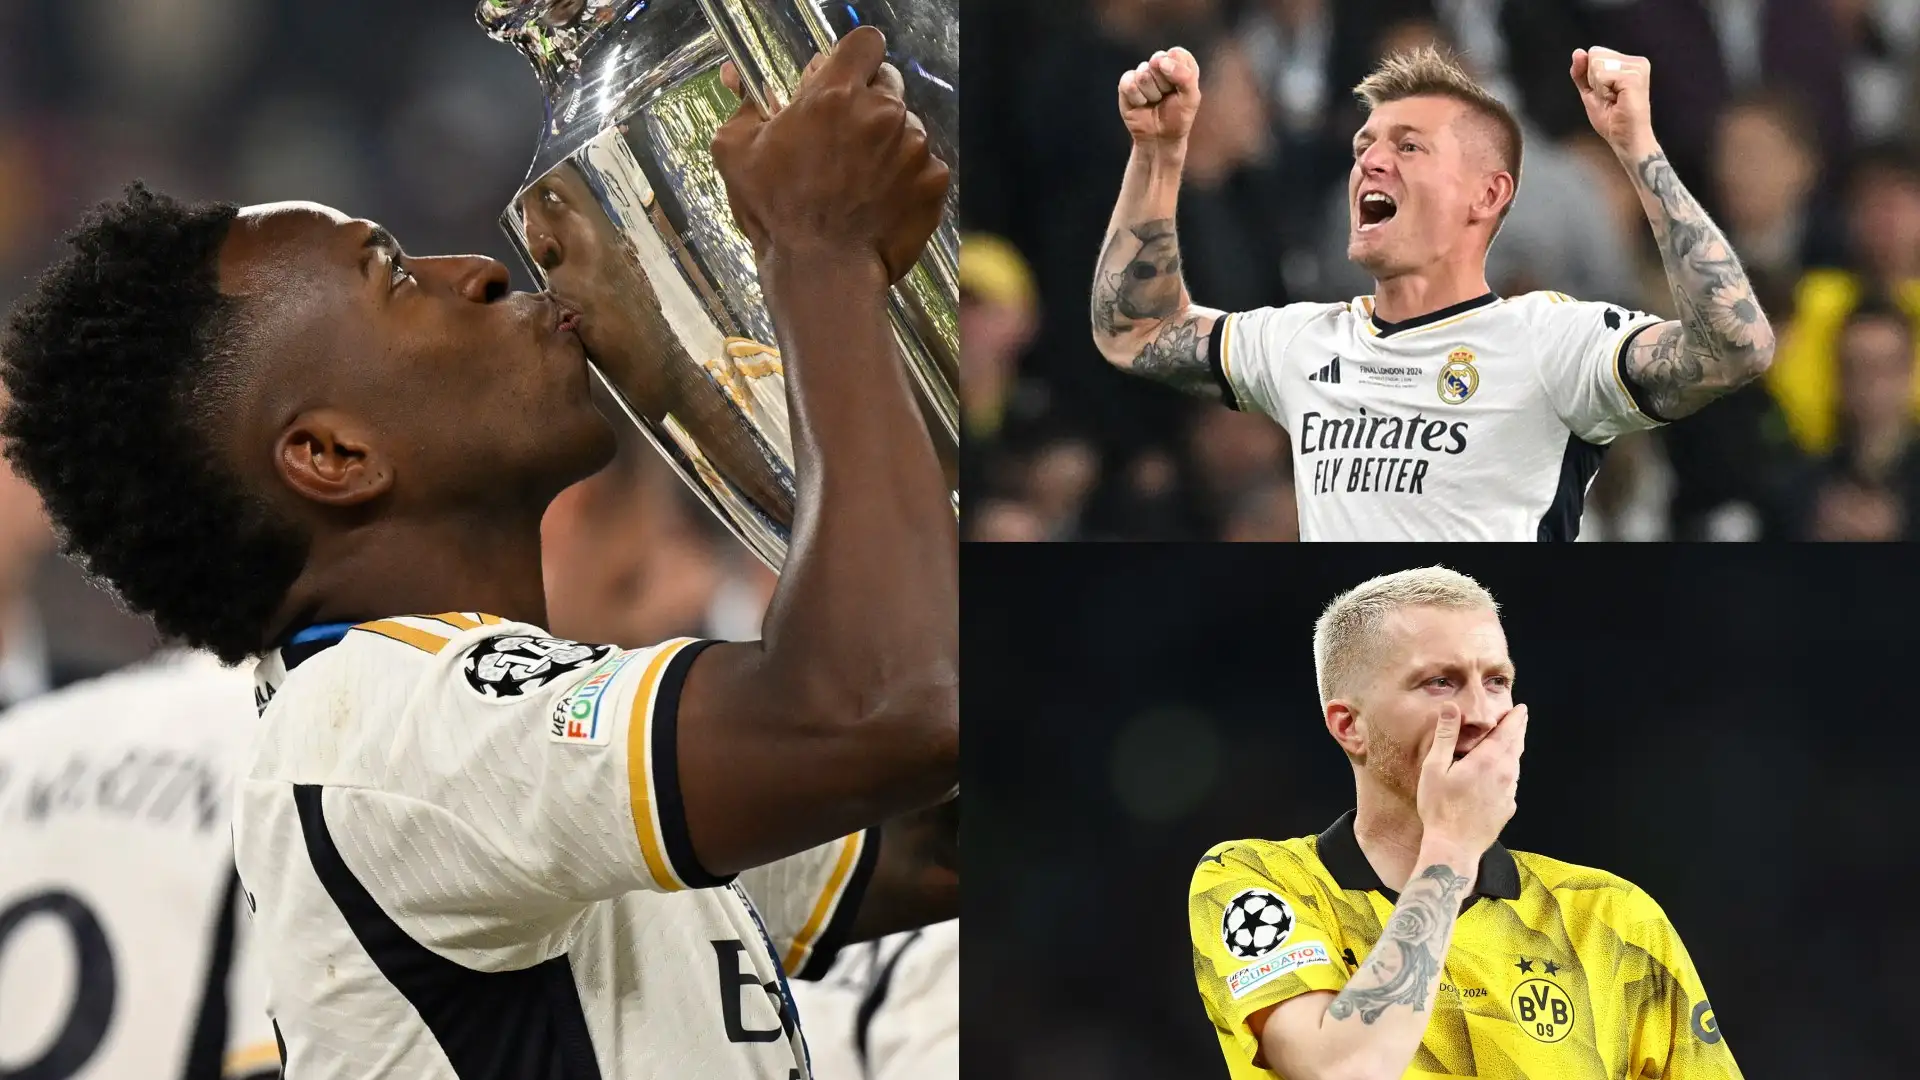 The Ballon d'Or moves ever closer for Vinicius Jr! Winners and losers as Real Madrid's brilliant Brazilian marks another Champions League final with a goal while Toni Kroos and Marco Reus get contrasting farewells